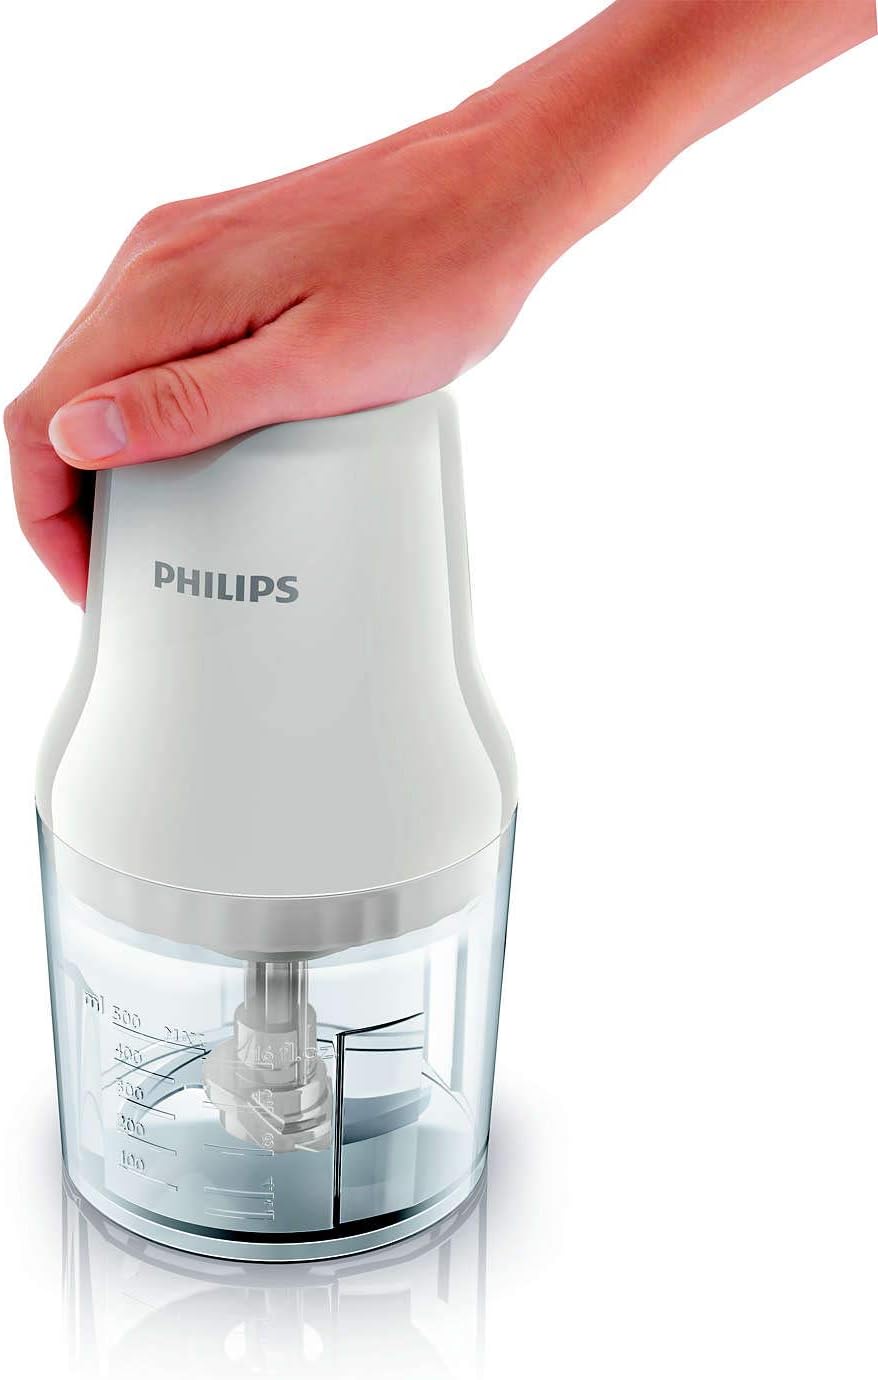 Philips Hand Mixer 450W - HR3740 | Supply Master Accra, Ghana Kitchen Appliances Buy Tools hardware Building materials